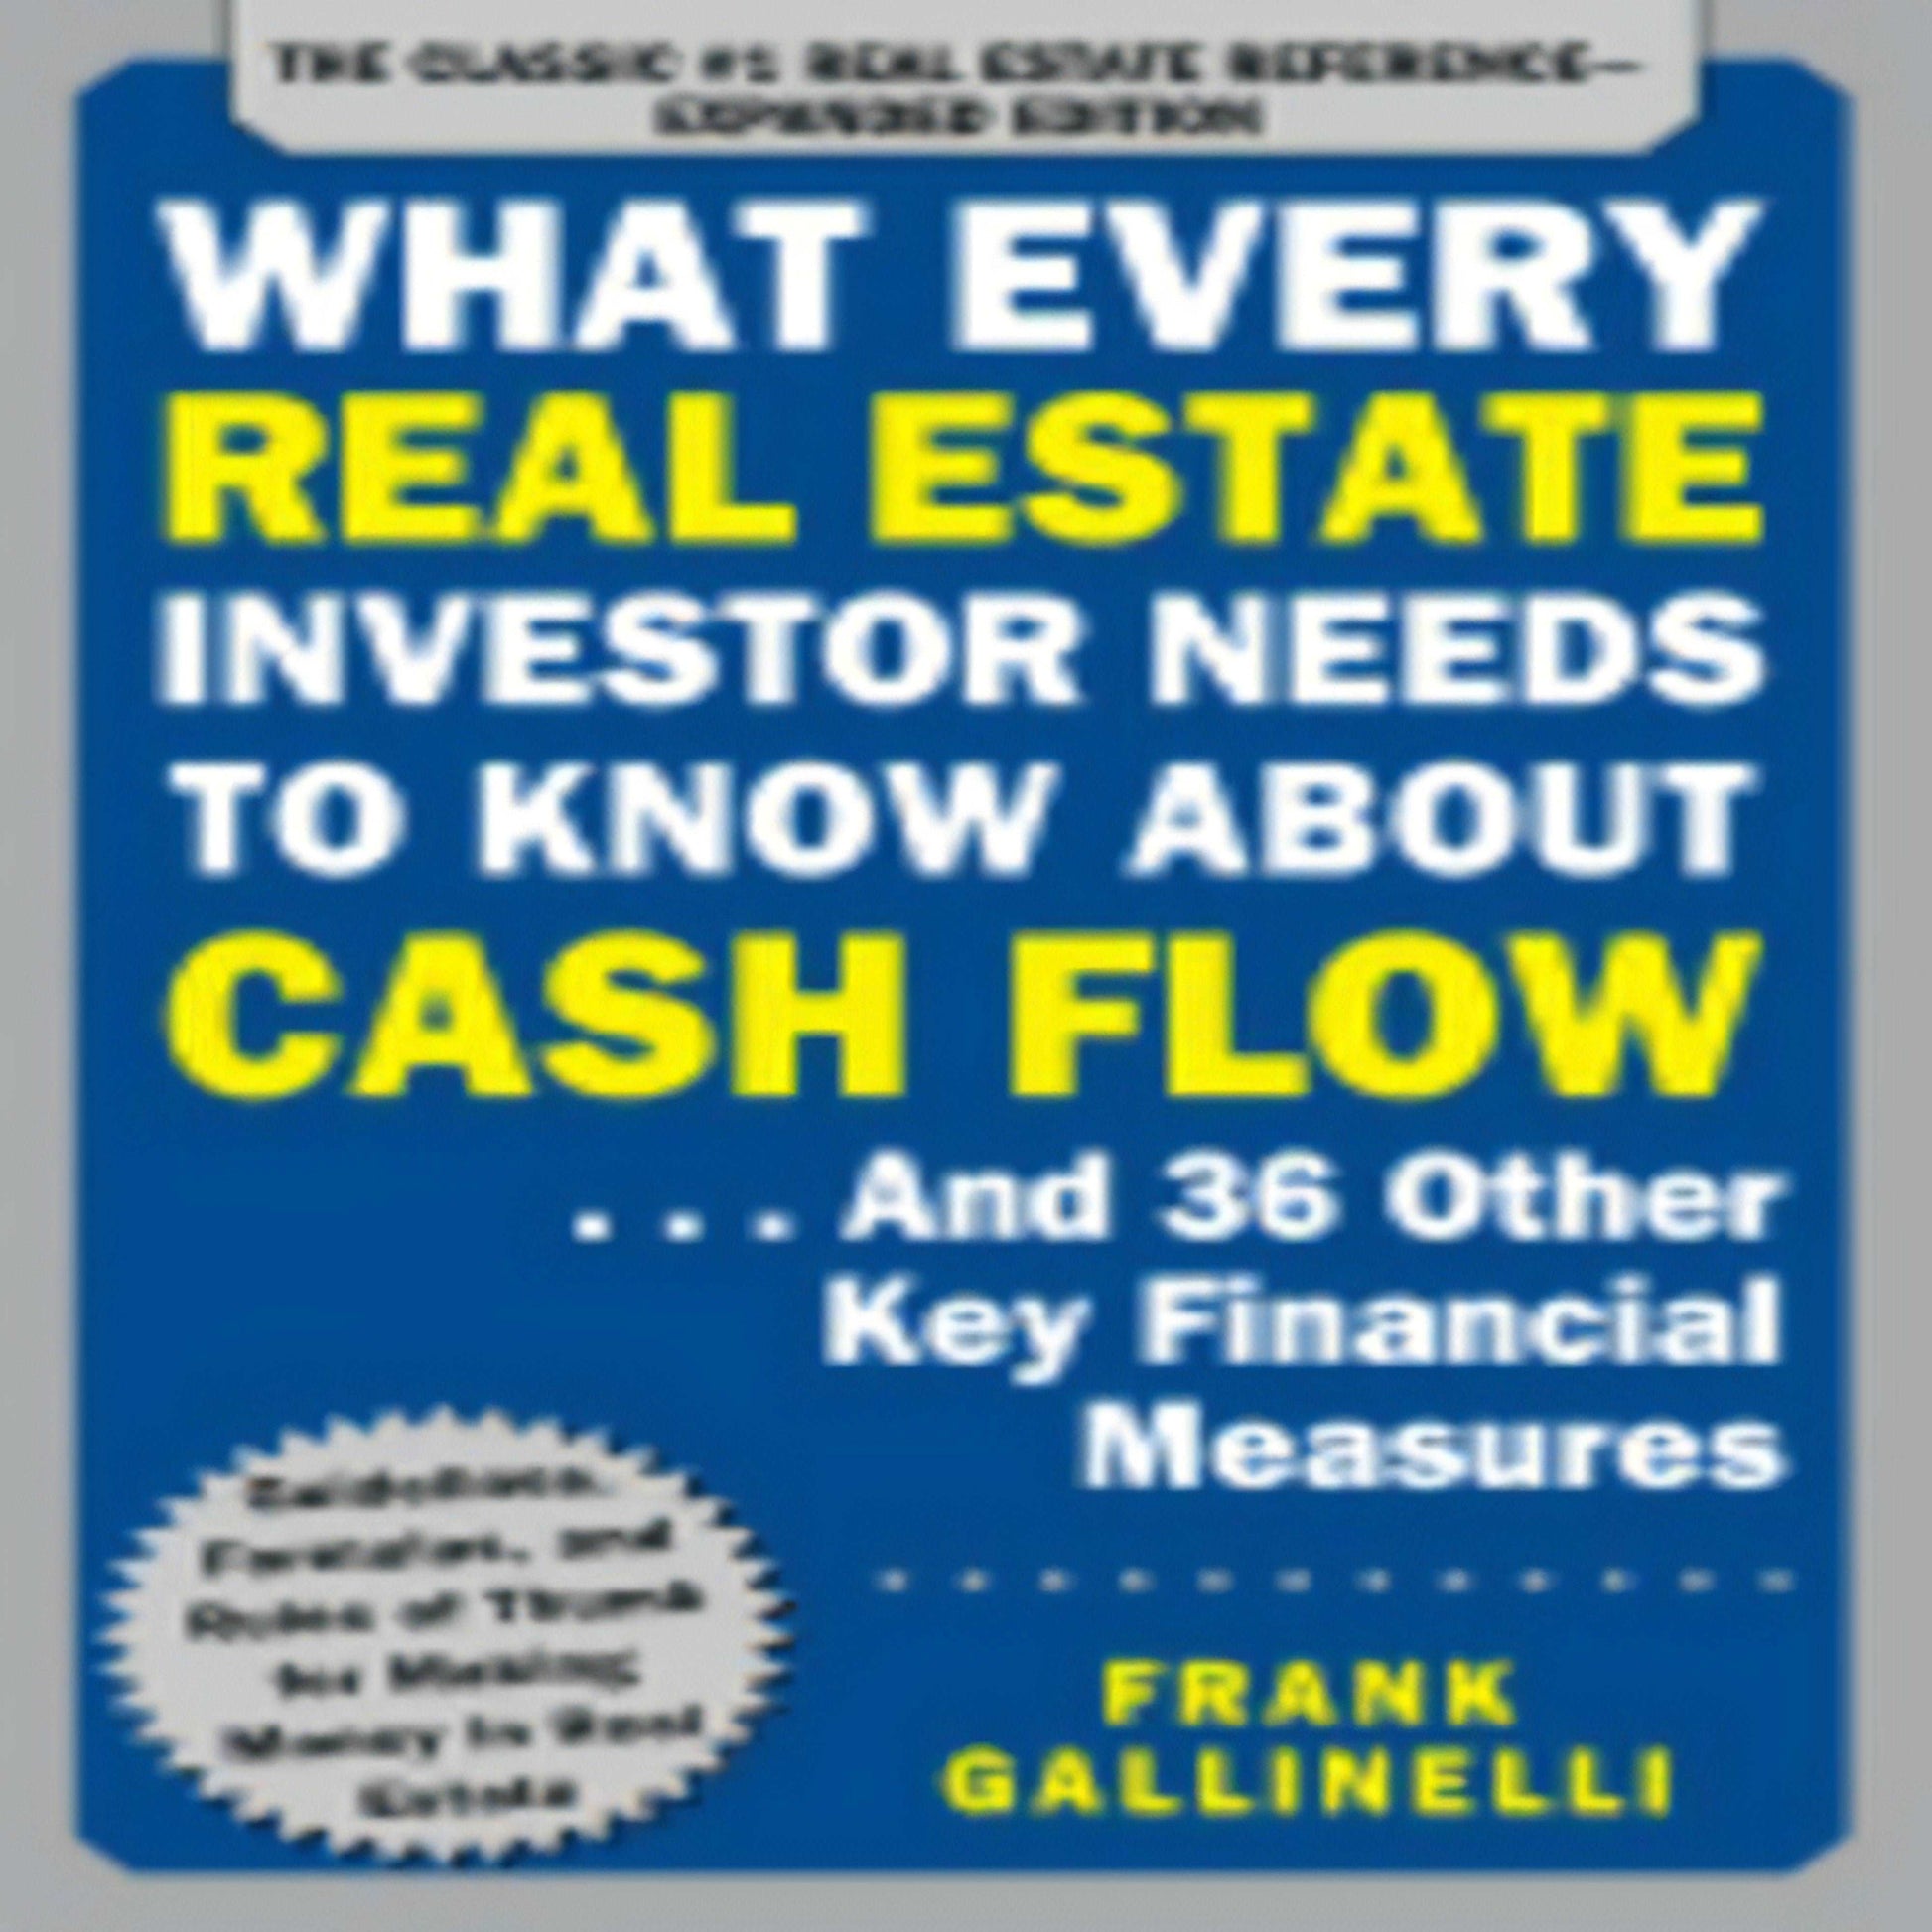 What Every Real Estate Investor Needs to Know about Cash Flow... and 36 Other Key Financial Measures (Updated)21-120122-1259586189DPGBOOKSTORE.COM. Today's Bestsellers.